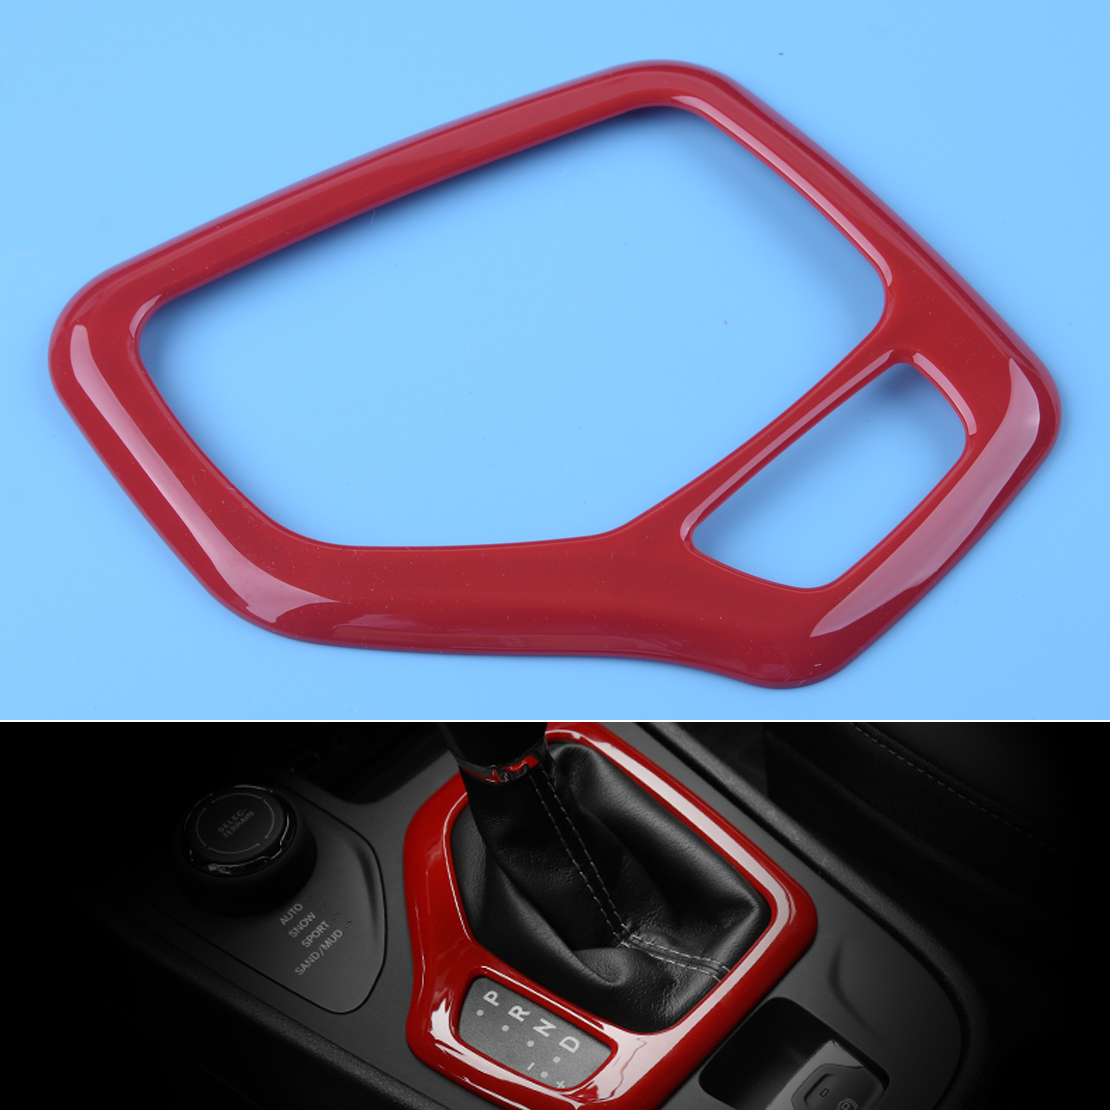 ABS Chrome Interior Accessories Trim Gear Frame Cover For Jeep Cherokee 14-2016